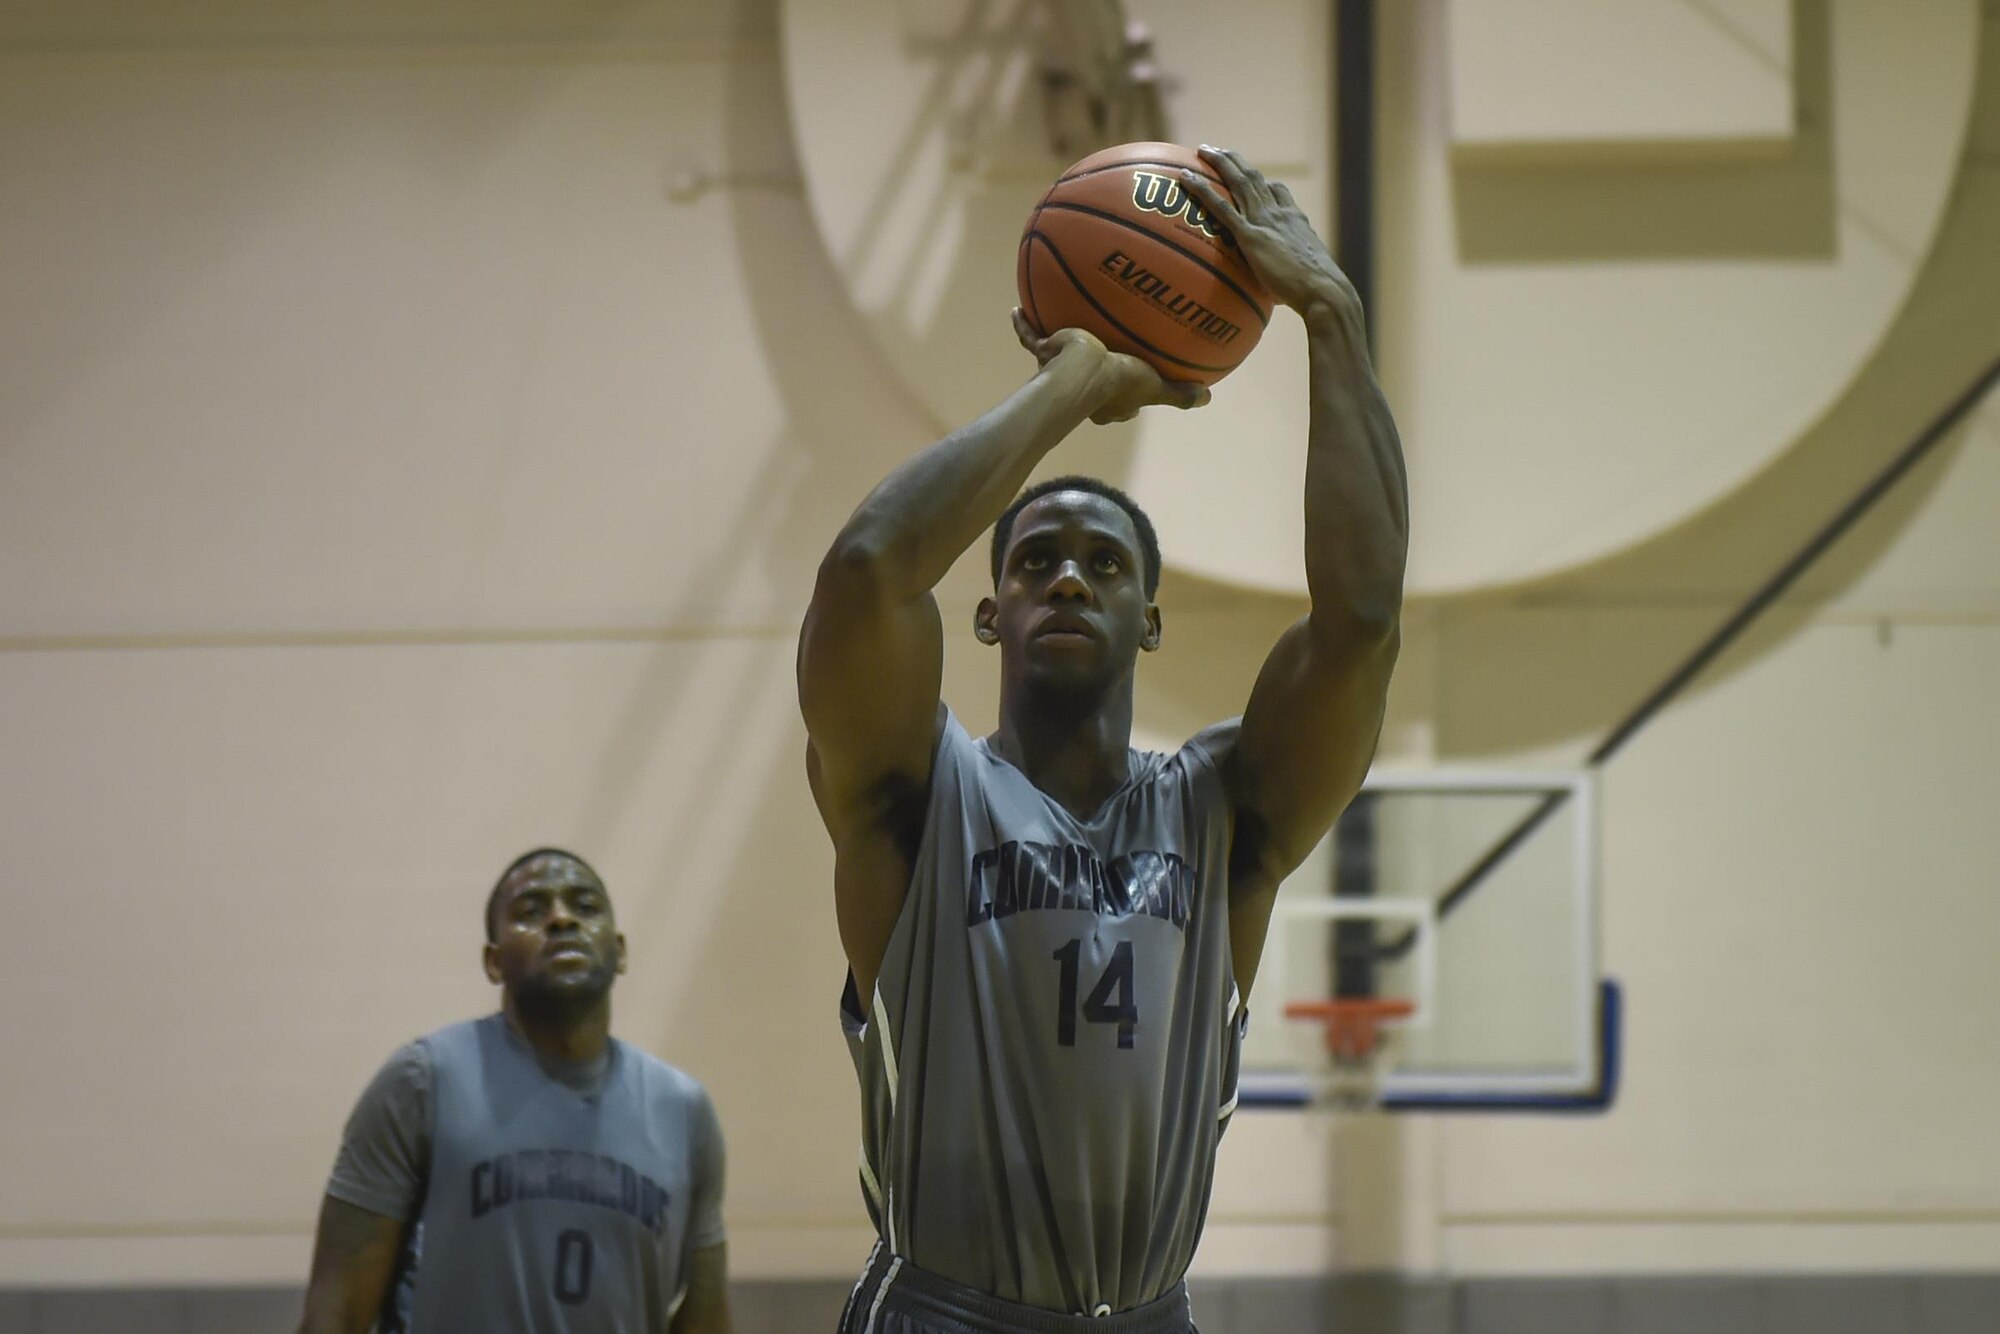 Clyde Summers, a member of Hurlburt Field’s basketball team, shoots a free throw during a basketball tournament at the Aderholt Fitness Center on Hurlburt Field, Fla., Jan. 15, 2017. The 1st Special Operations Force Support Squadron hosted the 2nd annual commemorative basketball tournament to celebrate Martin Luther King Jr. Day, which is observed on the third Monday of January. (U.S. Air Force photo by Airman 1st Class Joseph Pick)